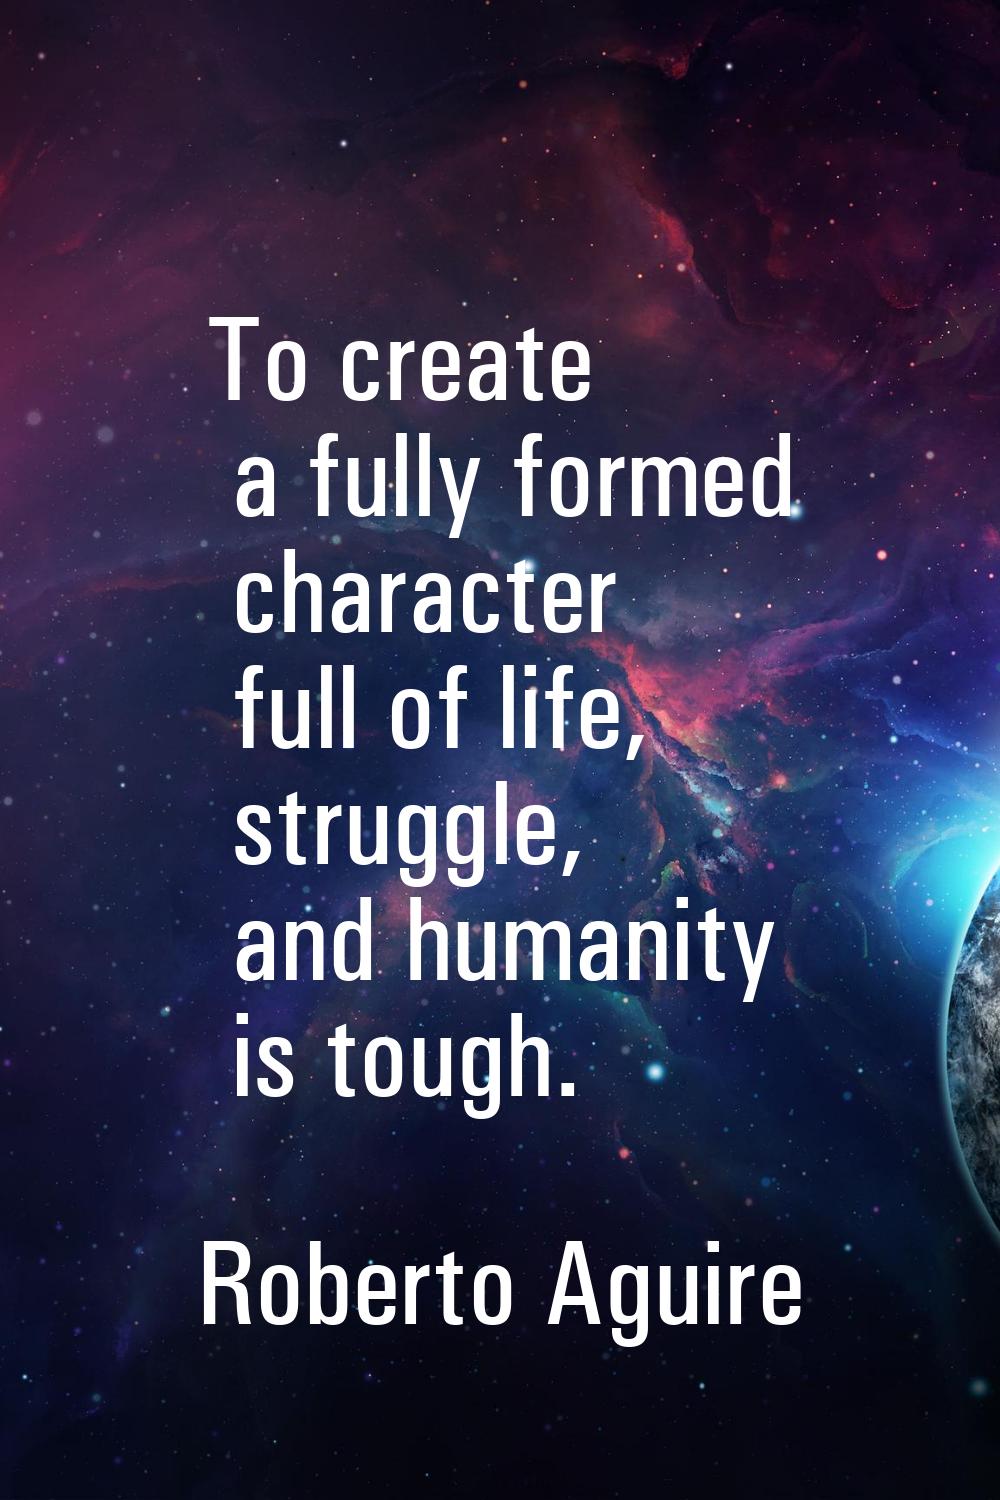 To create a fully formed character full of life, struggle, and humanity is tough.